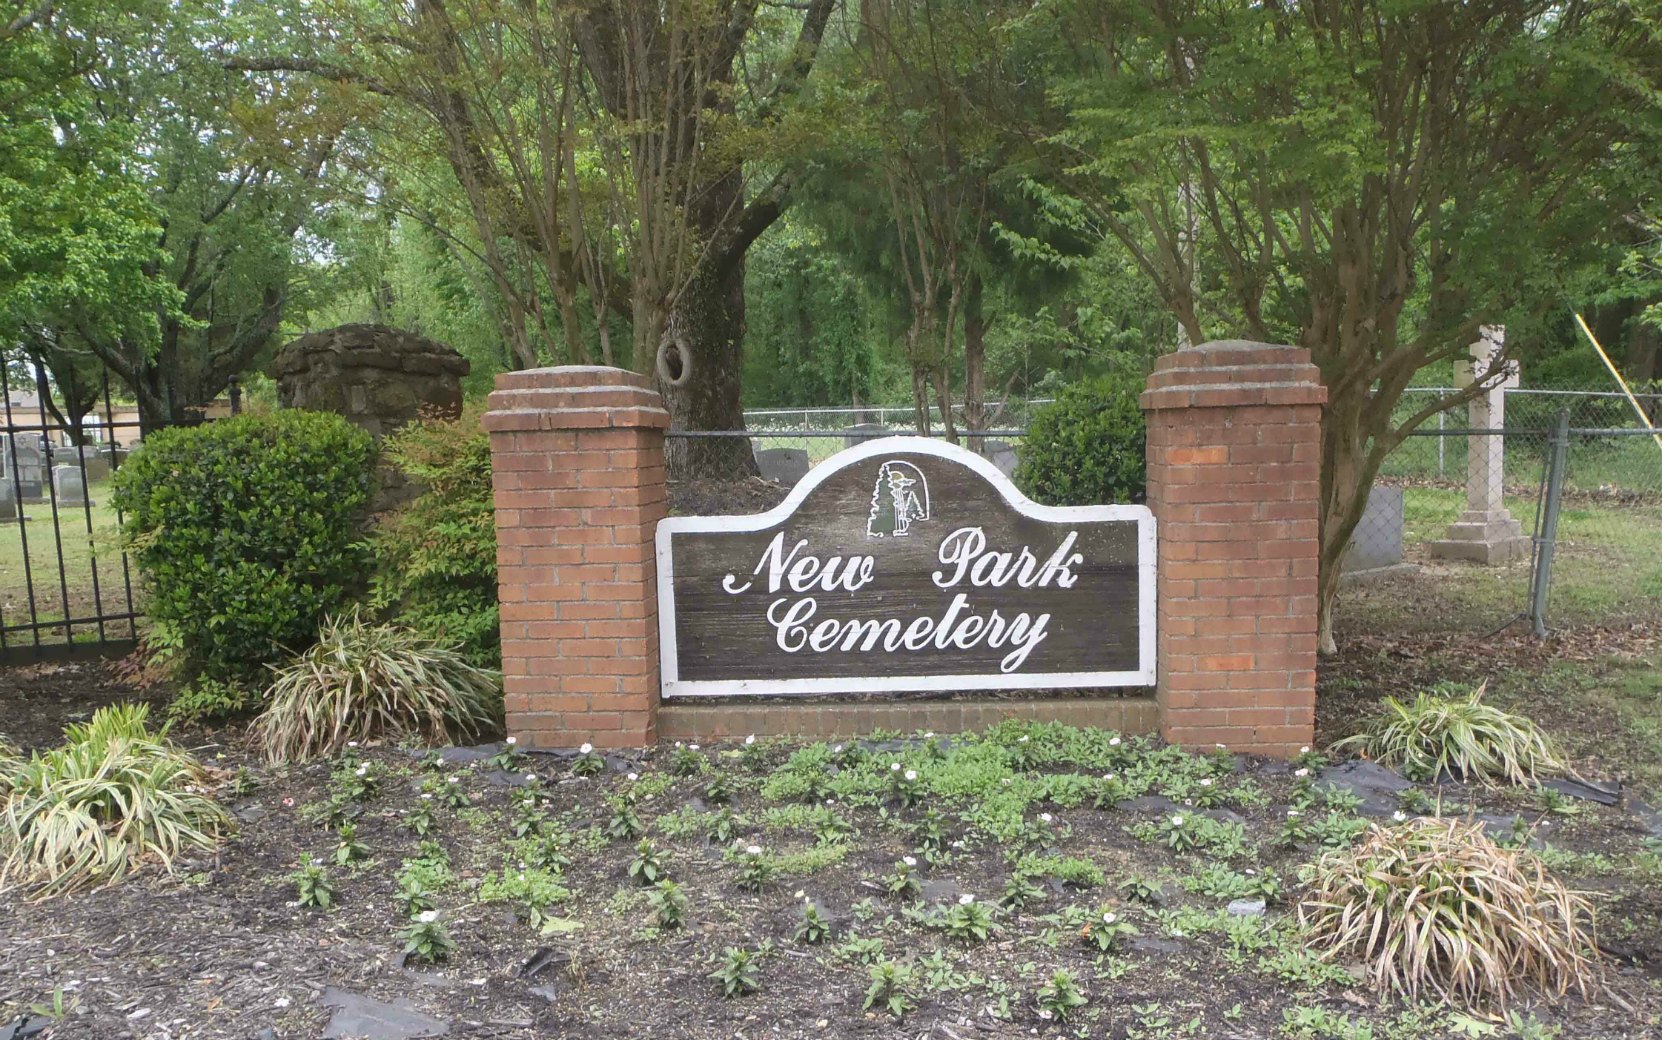 The sign at the entrance gate of New Park Cemetery, Memphis, Tennessee